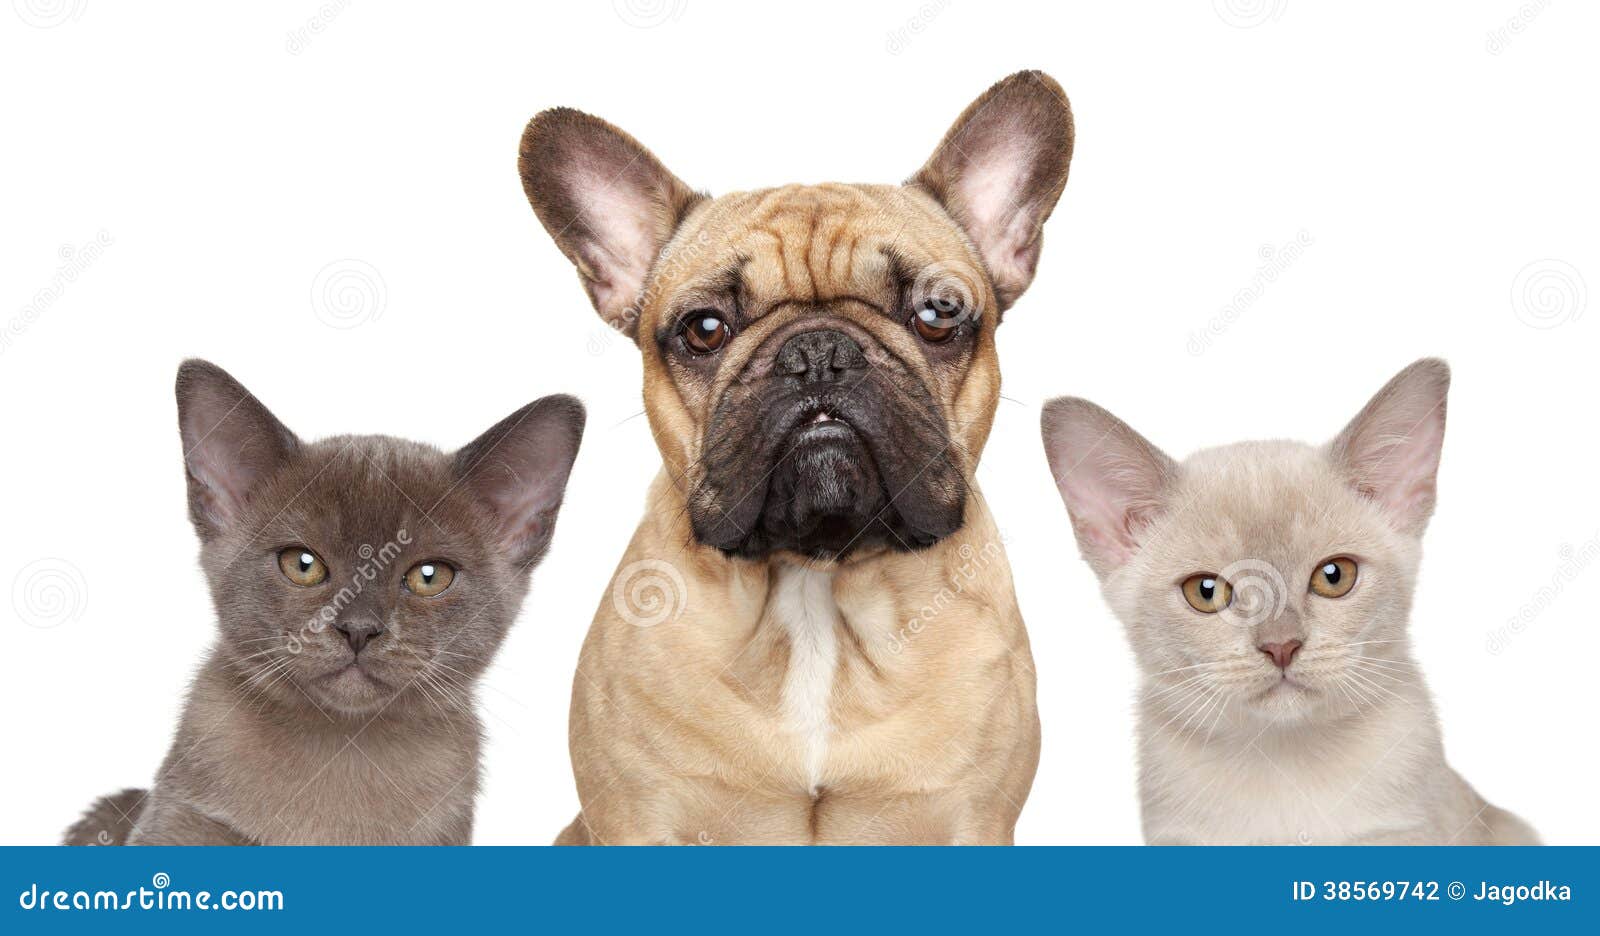 French Bulldog And Two Kittens Stock Photo - Image: 38569742